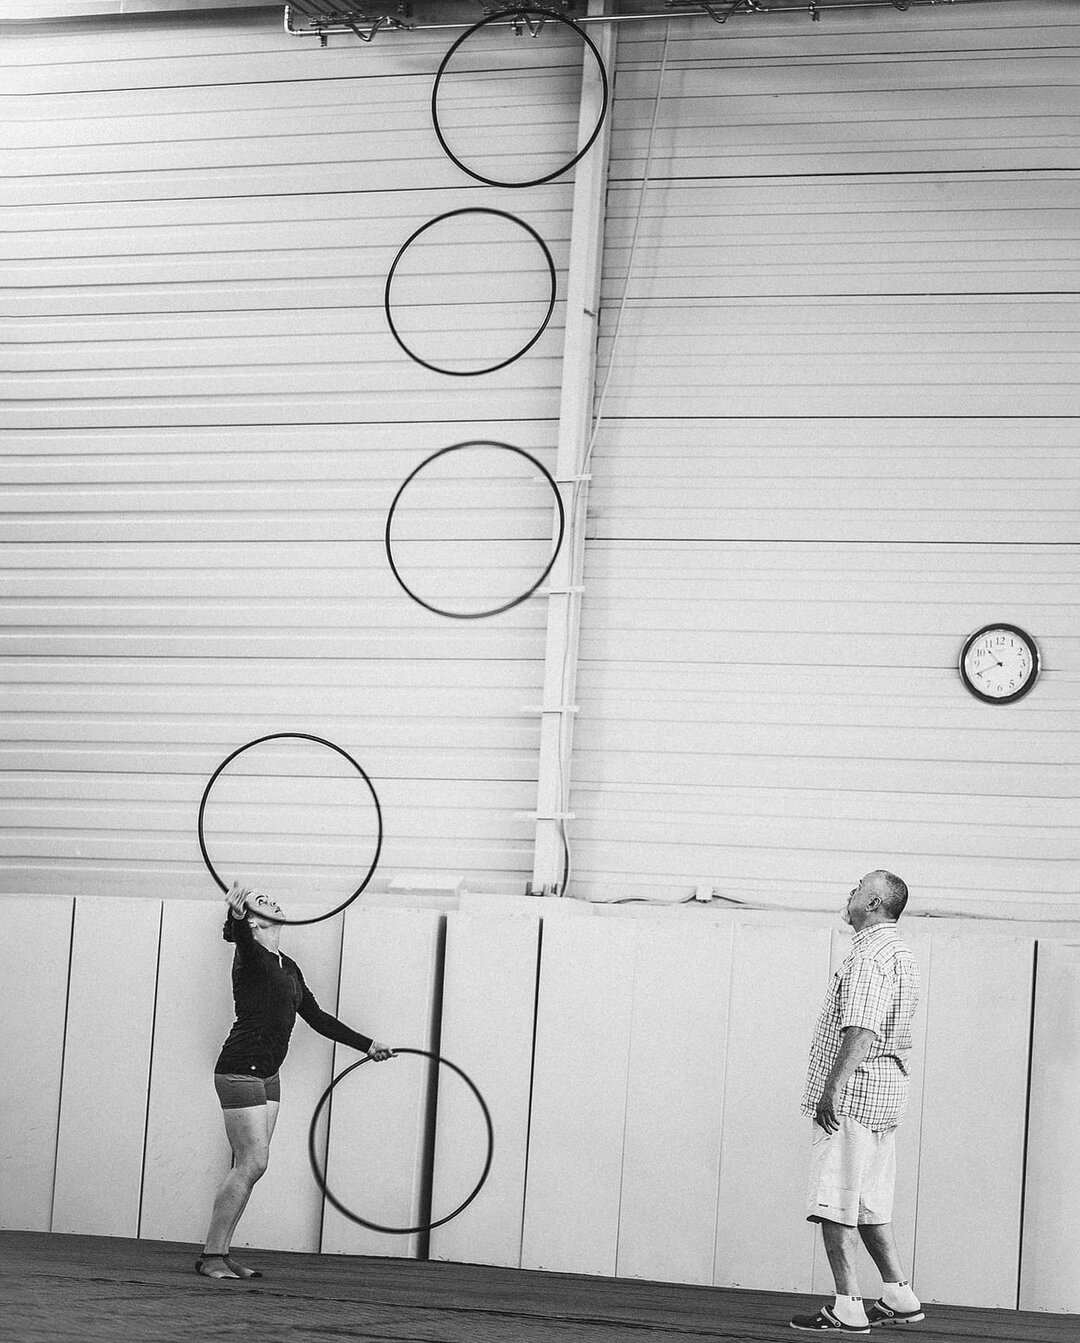 Photos I never posted from summer school in Kiev⠀⠀⠀⠀⠀⠀⠀⠀⠀
I have such a love hate relationship with this trick. I always felt like it&rsquo;s a &ldquo;must have&rdquo; if you&rsquo;re going to call yourself a hoop juggler. I did manage to double my p